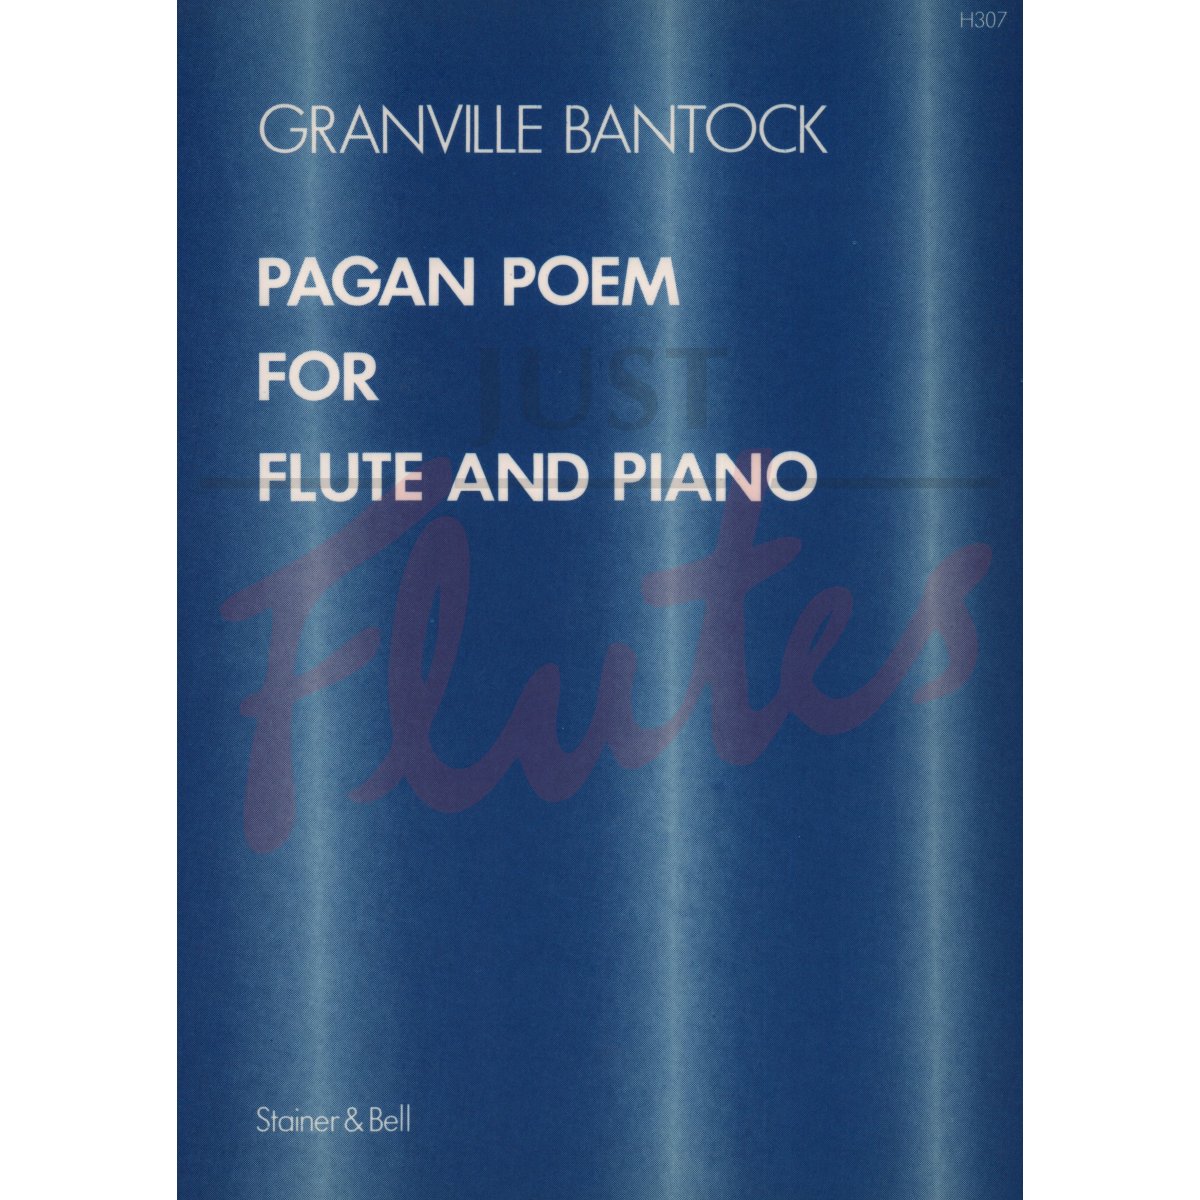 Pagan Poem for Flute and Piano